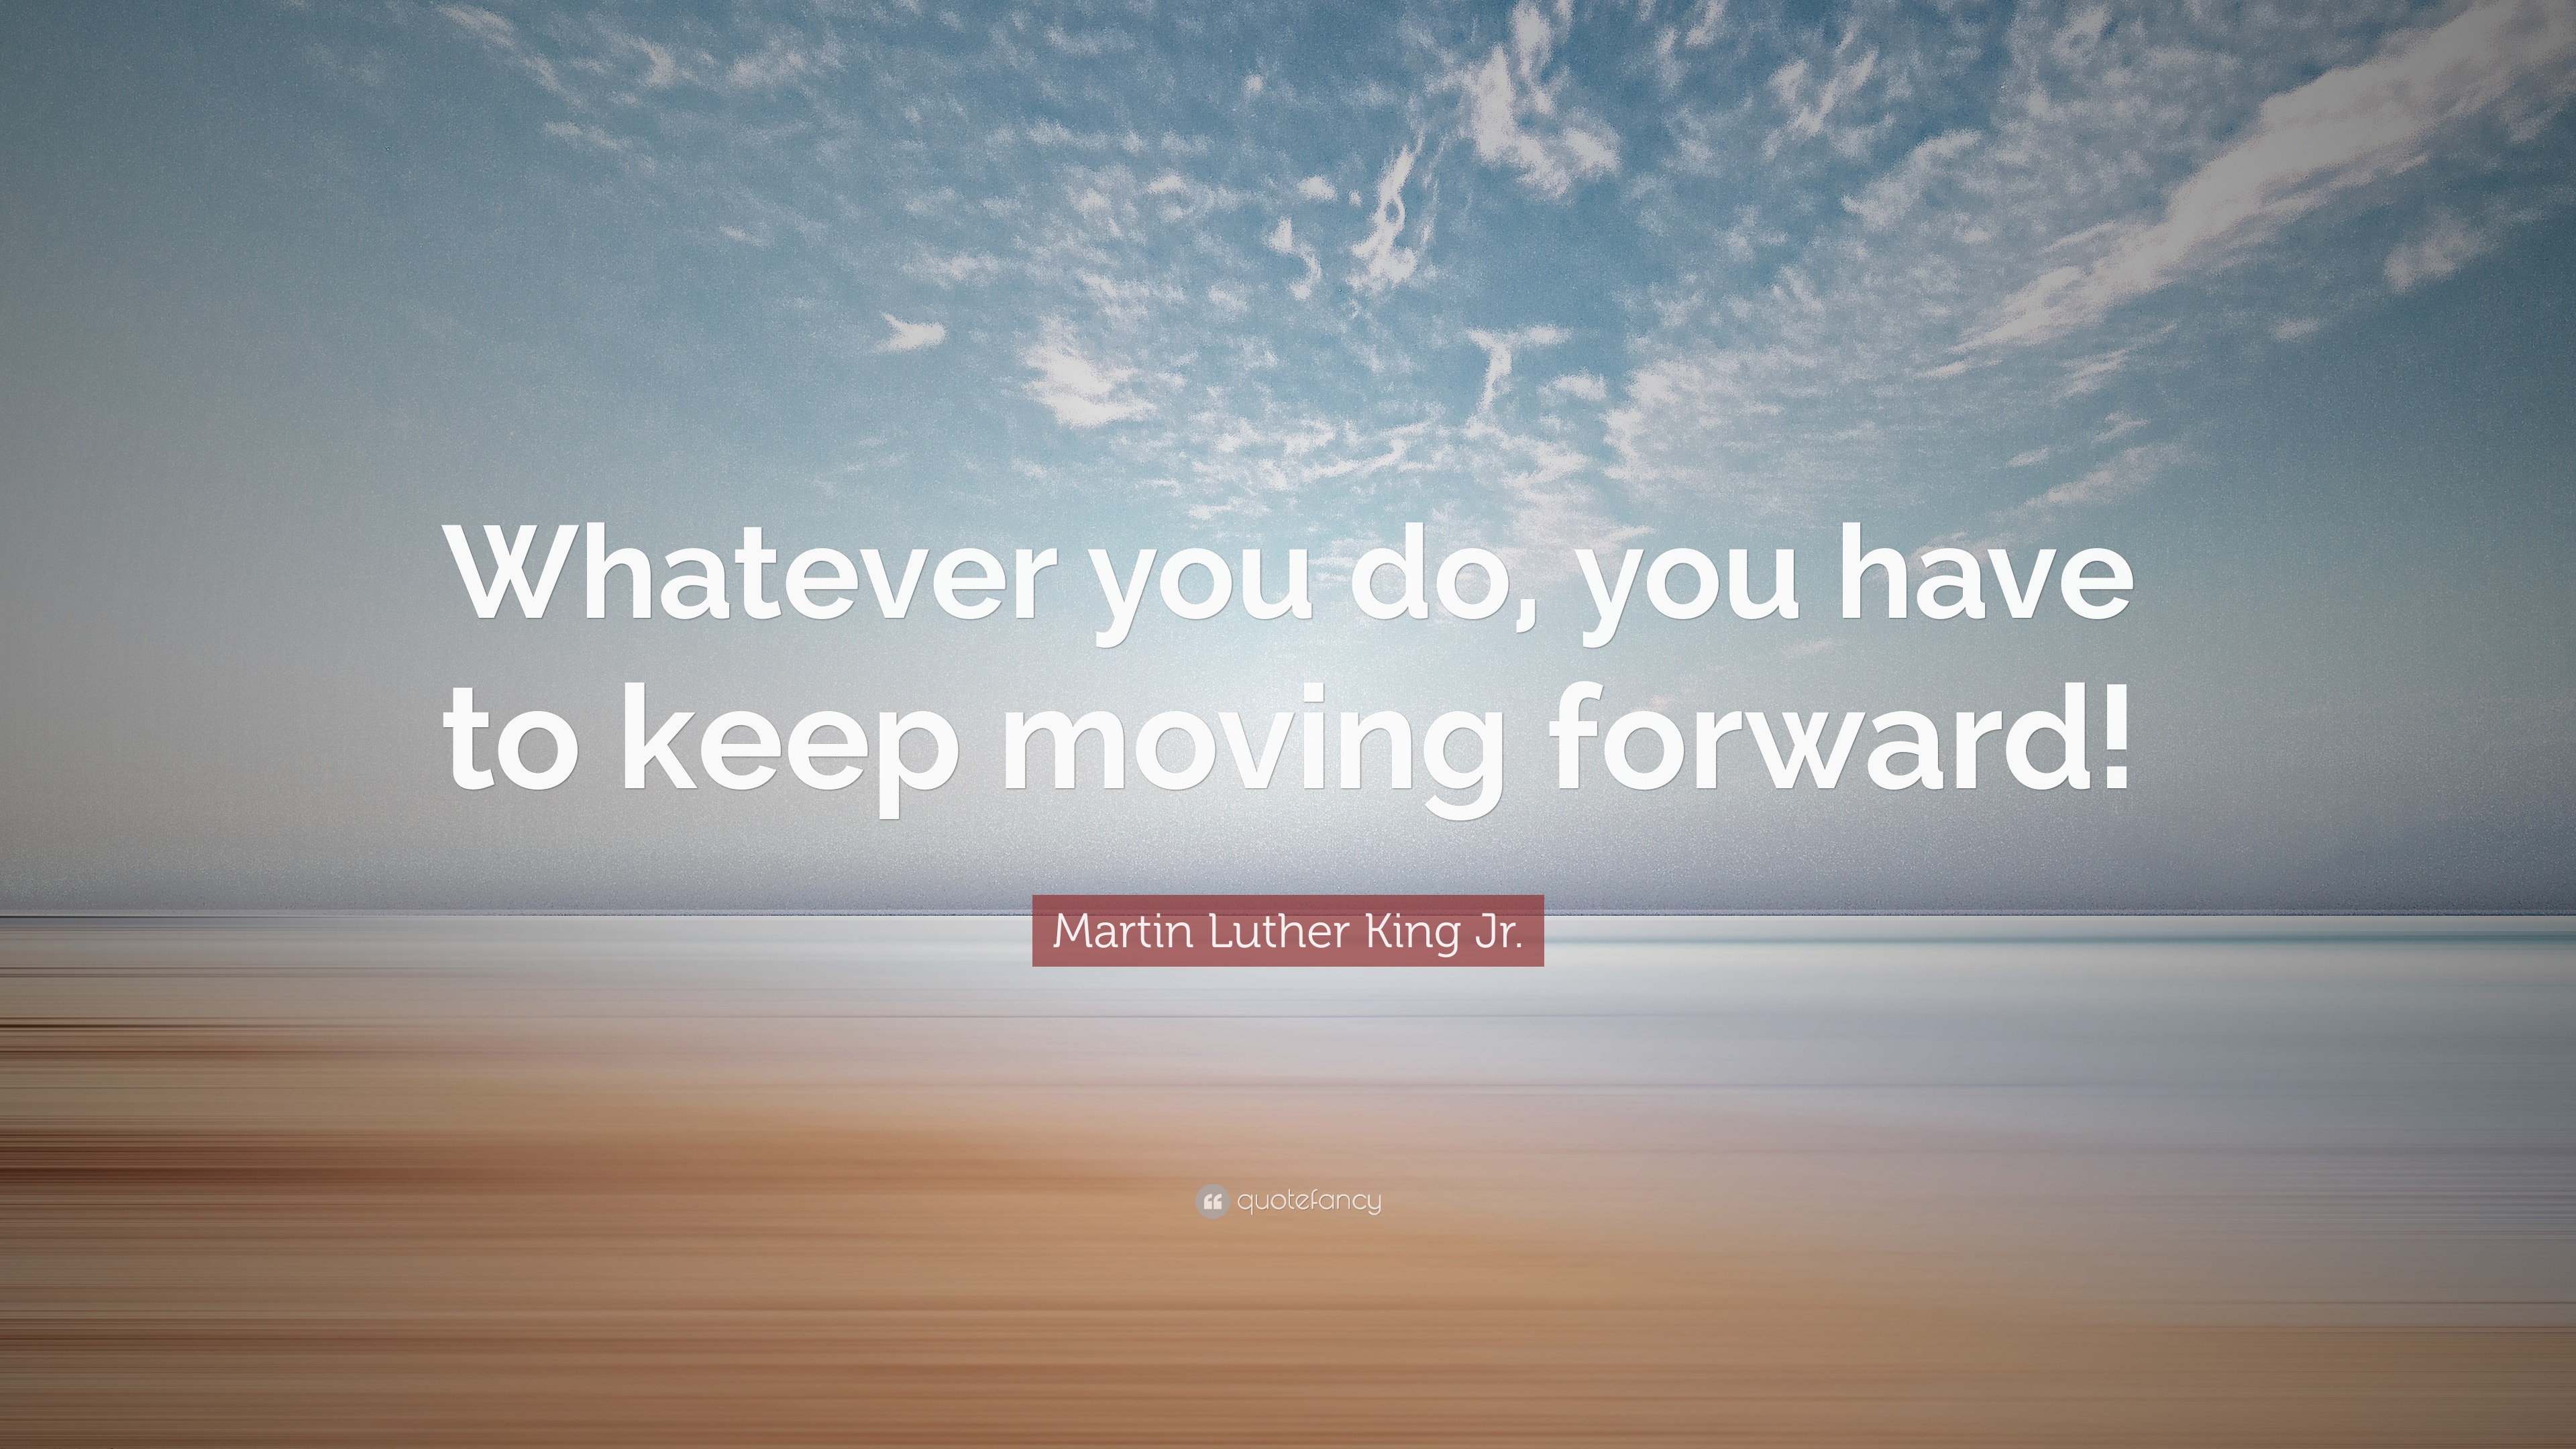 Martin Luther King Jr. Quote: “Whatever you do, you have to keep moving  forward!”